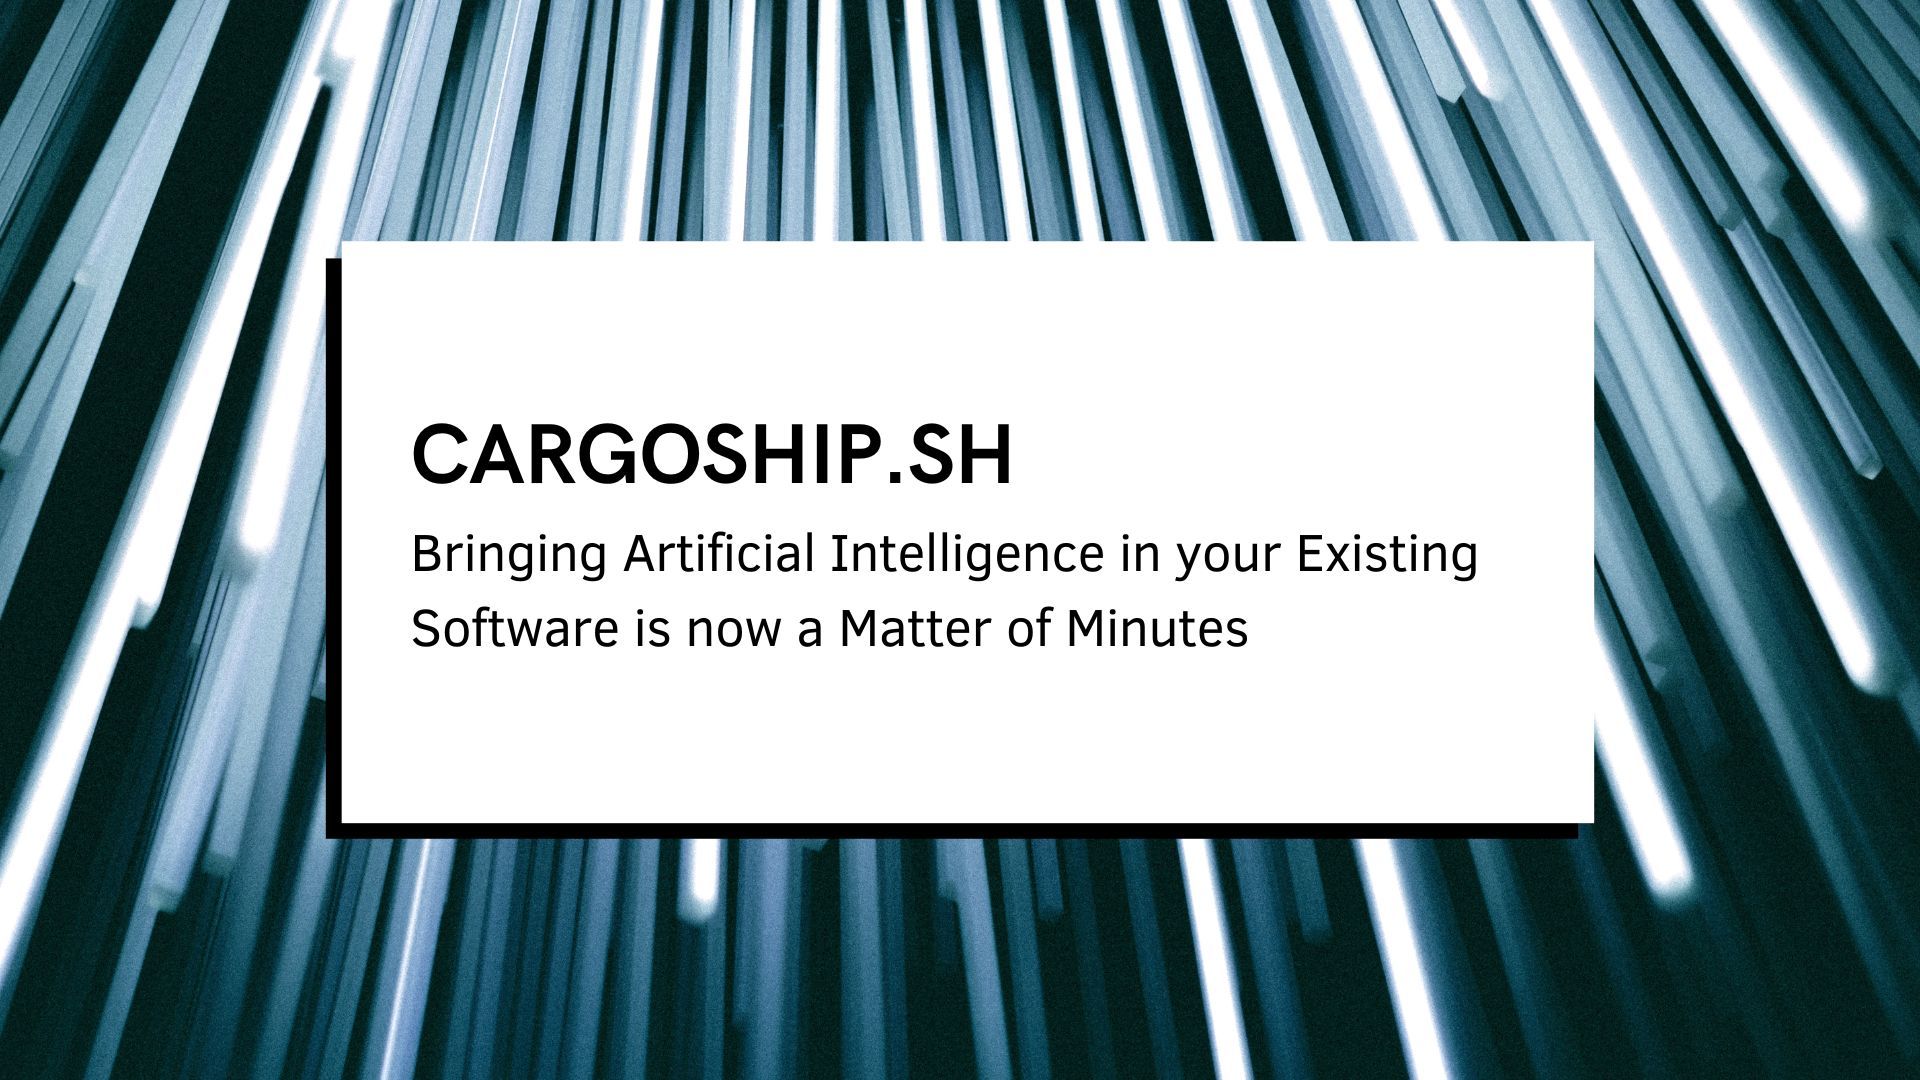 Bringing Artificial Intelligence in your Existing Software is now a Matter of Minutes